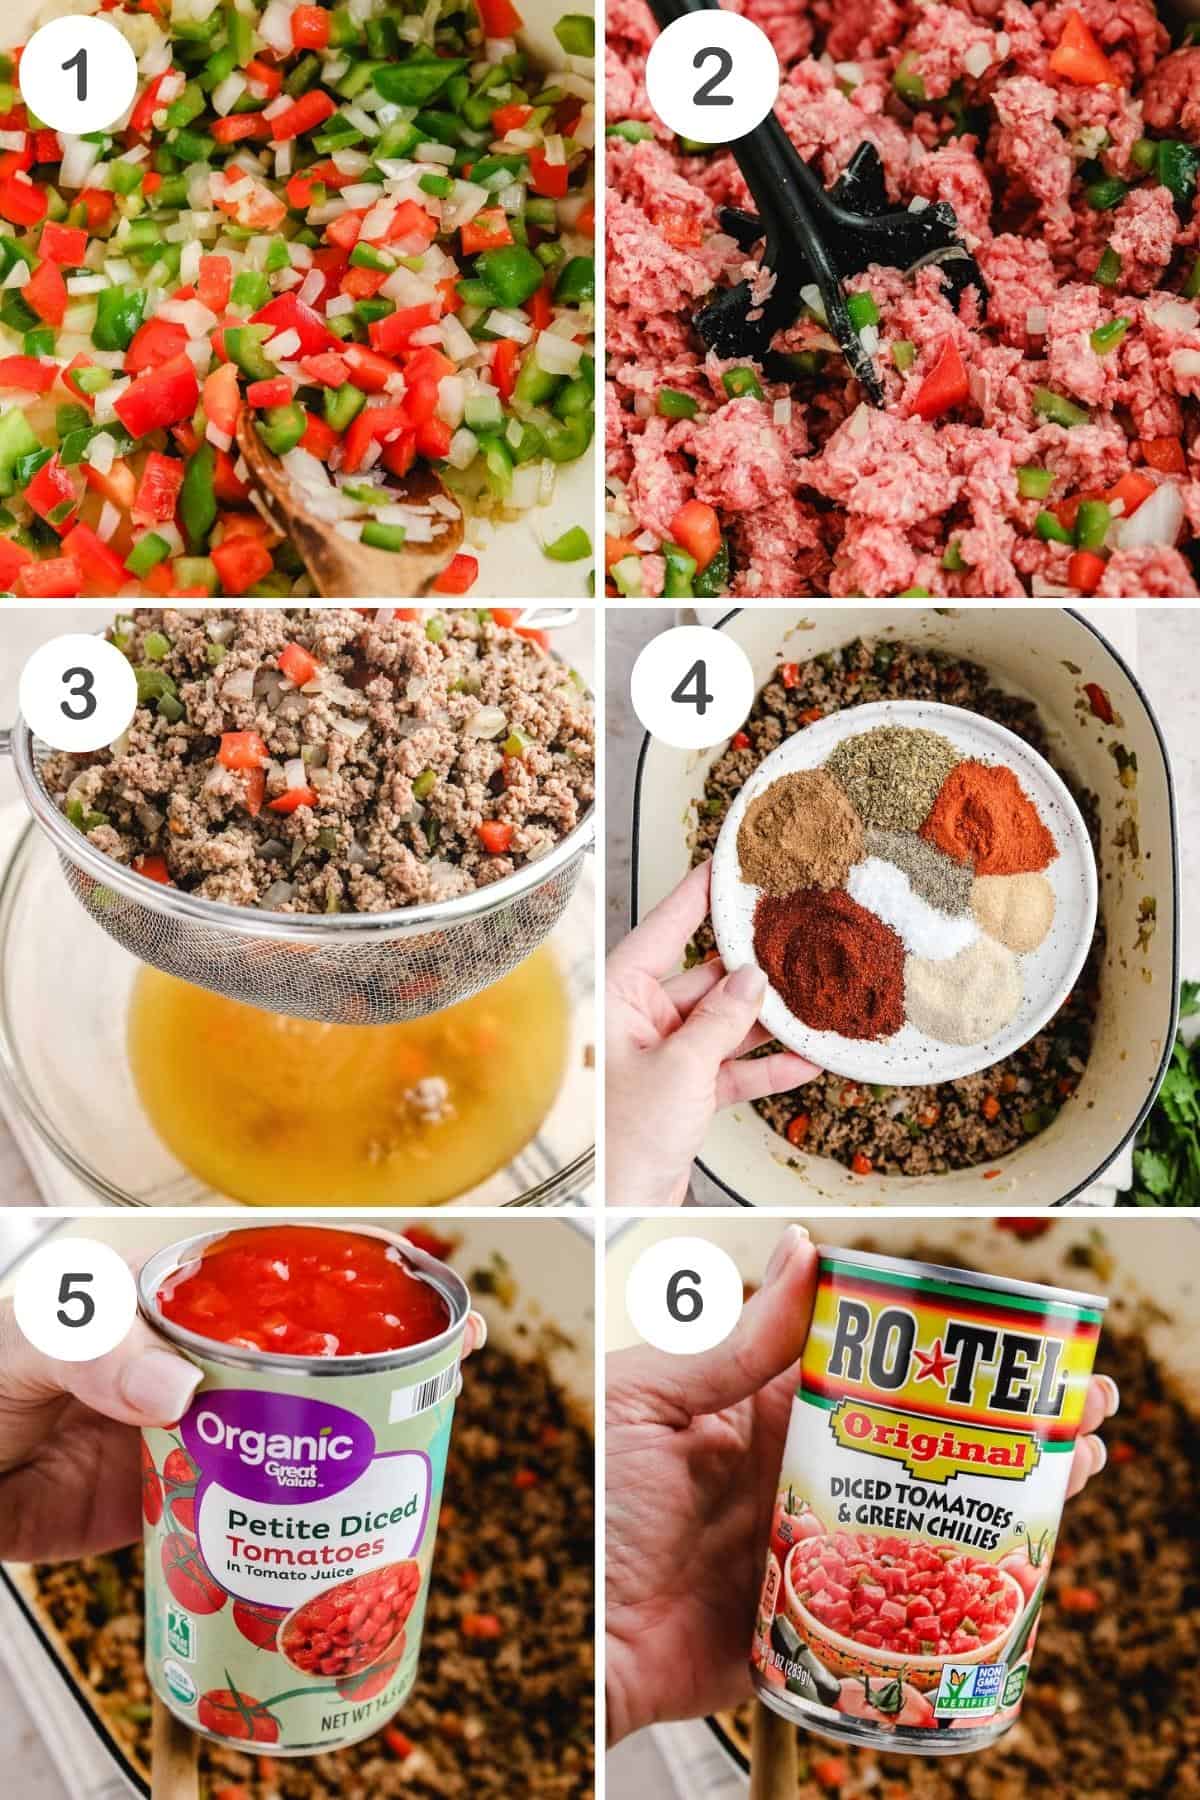 recipe step by step photos numbered. 